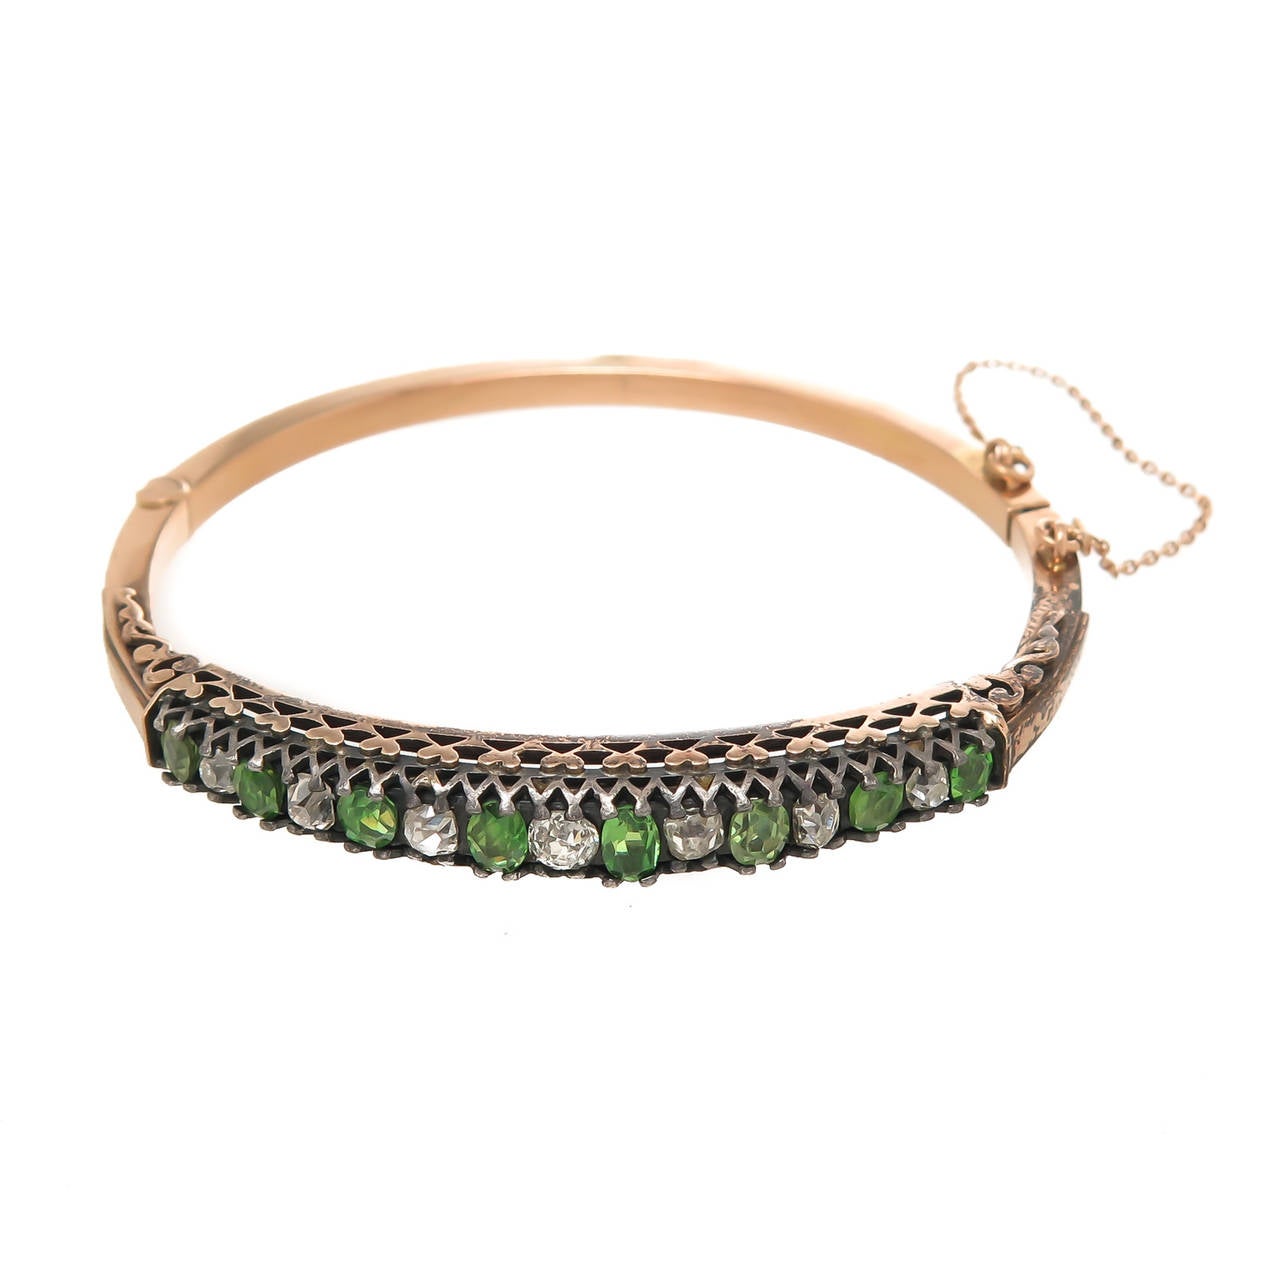 Circa 1900 Silver top and Gold bangle Bracelet possibly of Russian Origin and set with oval and oval Cushion cut Green Demantoid Garnets totaling approximately 2 Carats that are of Fine Bright Green Color typical of Russian Mined stones. Further set